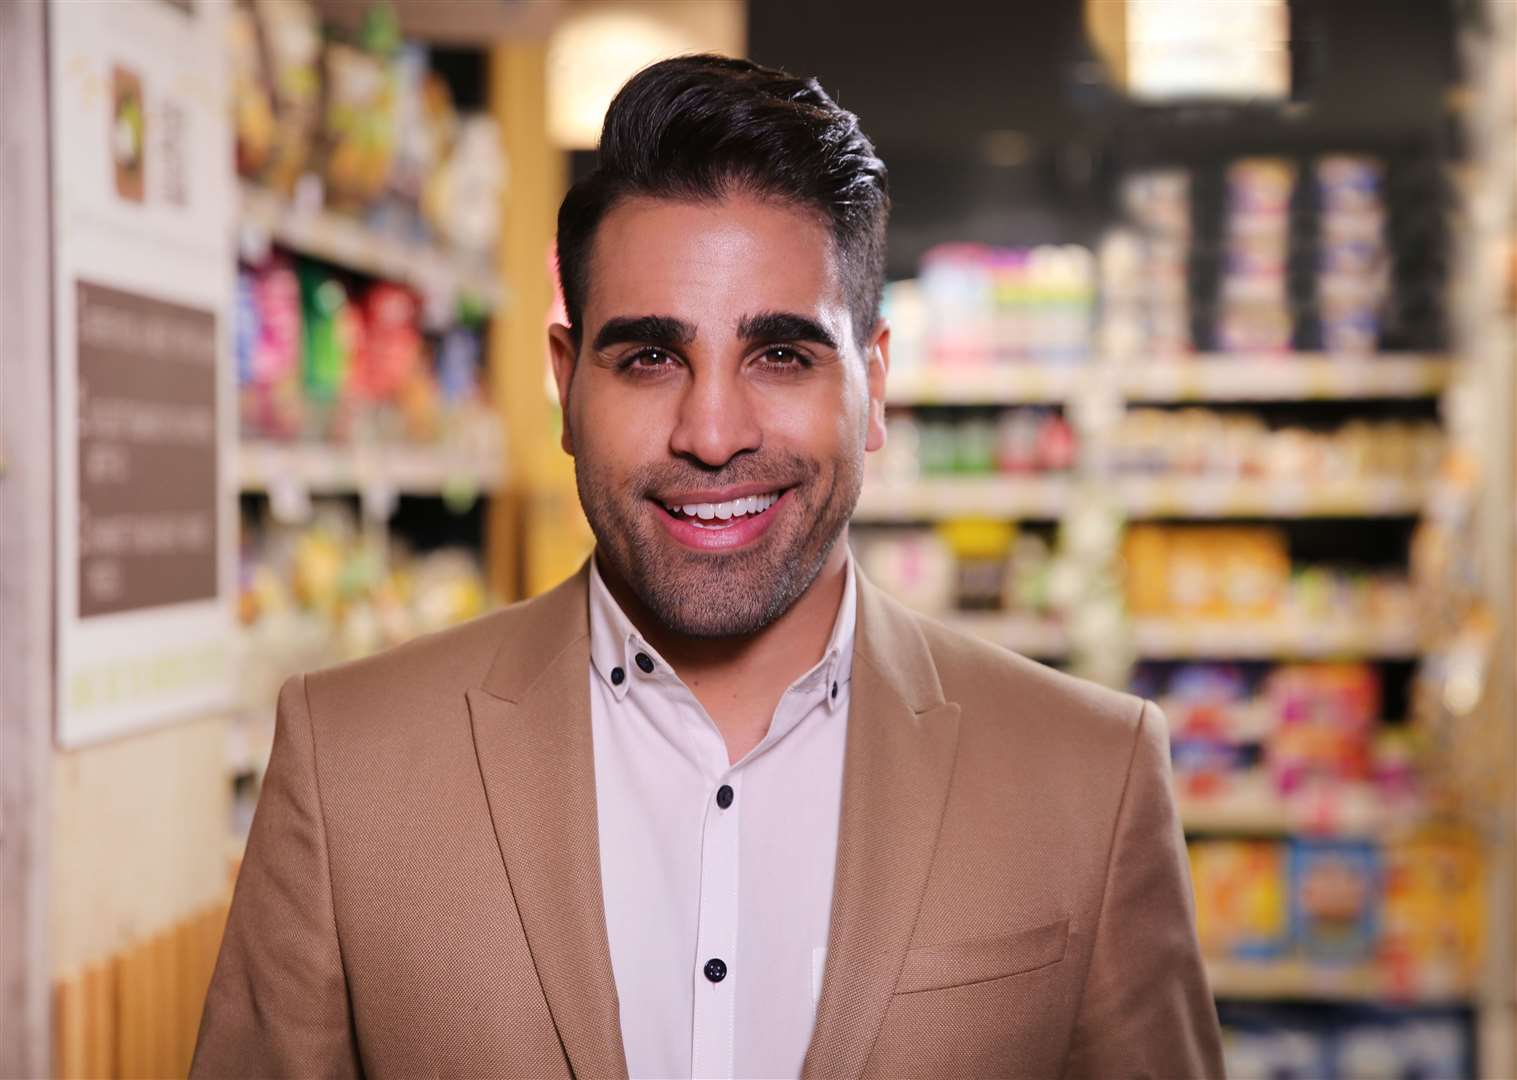 Dr Ranj will be signing copies of his book Save Money Lose Weight at Bluewater Picture: ITV/(C) Twofour Productions